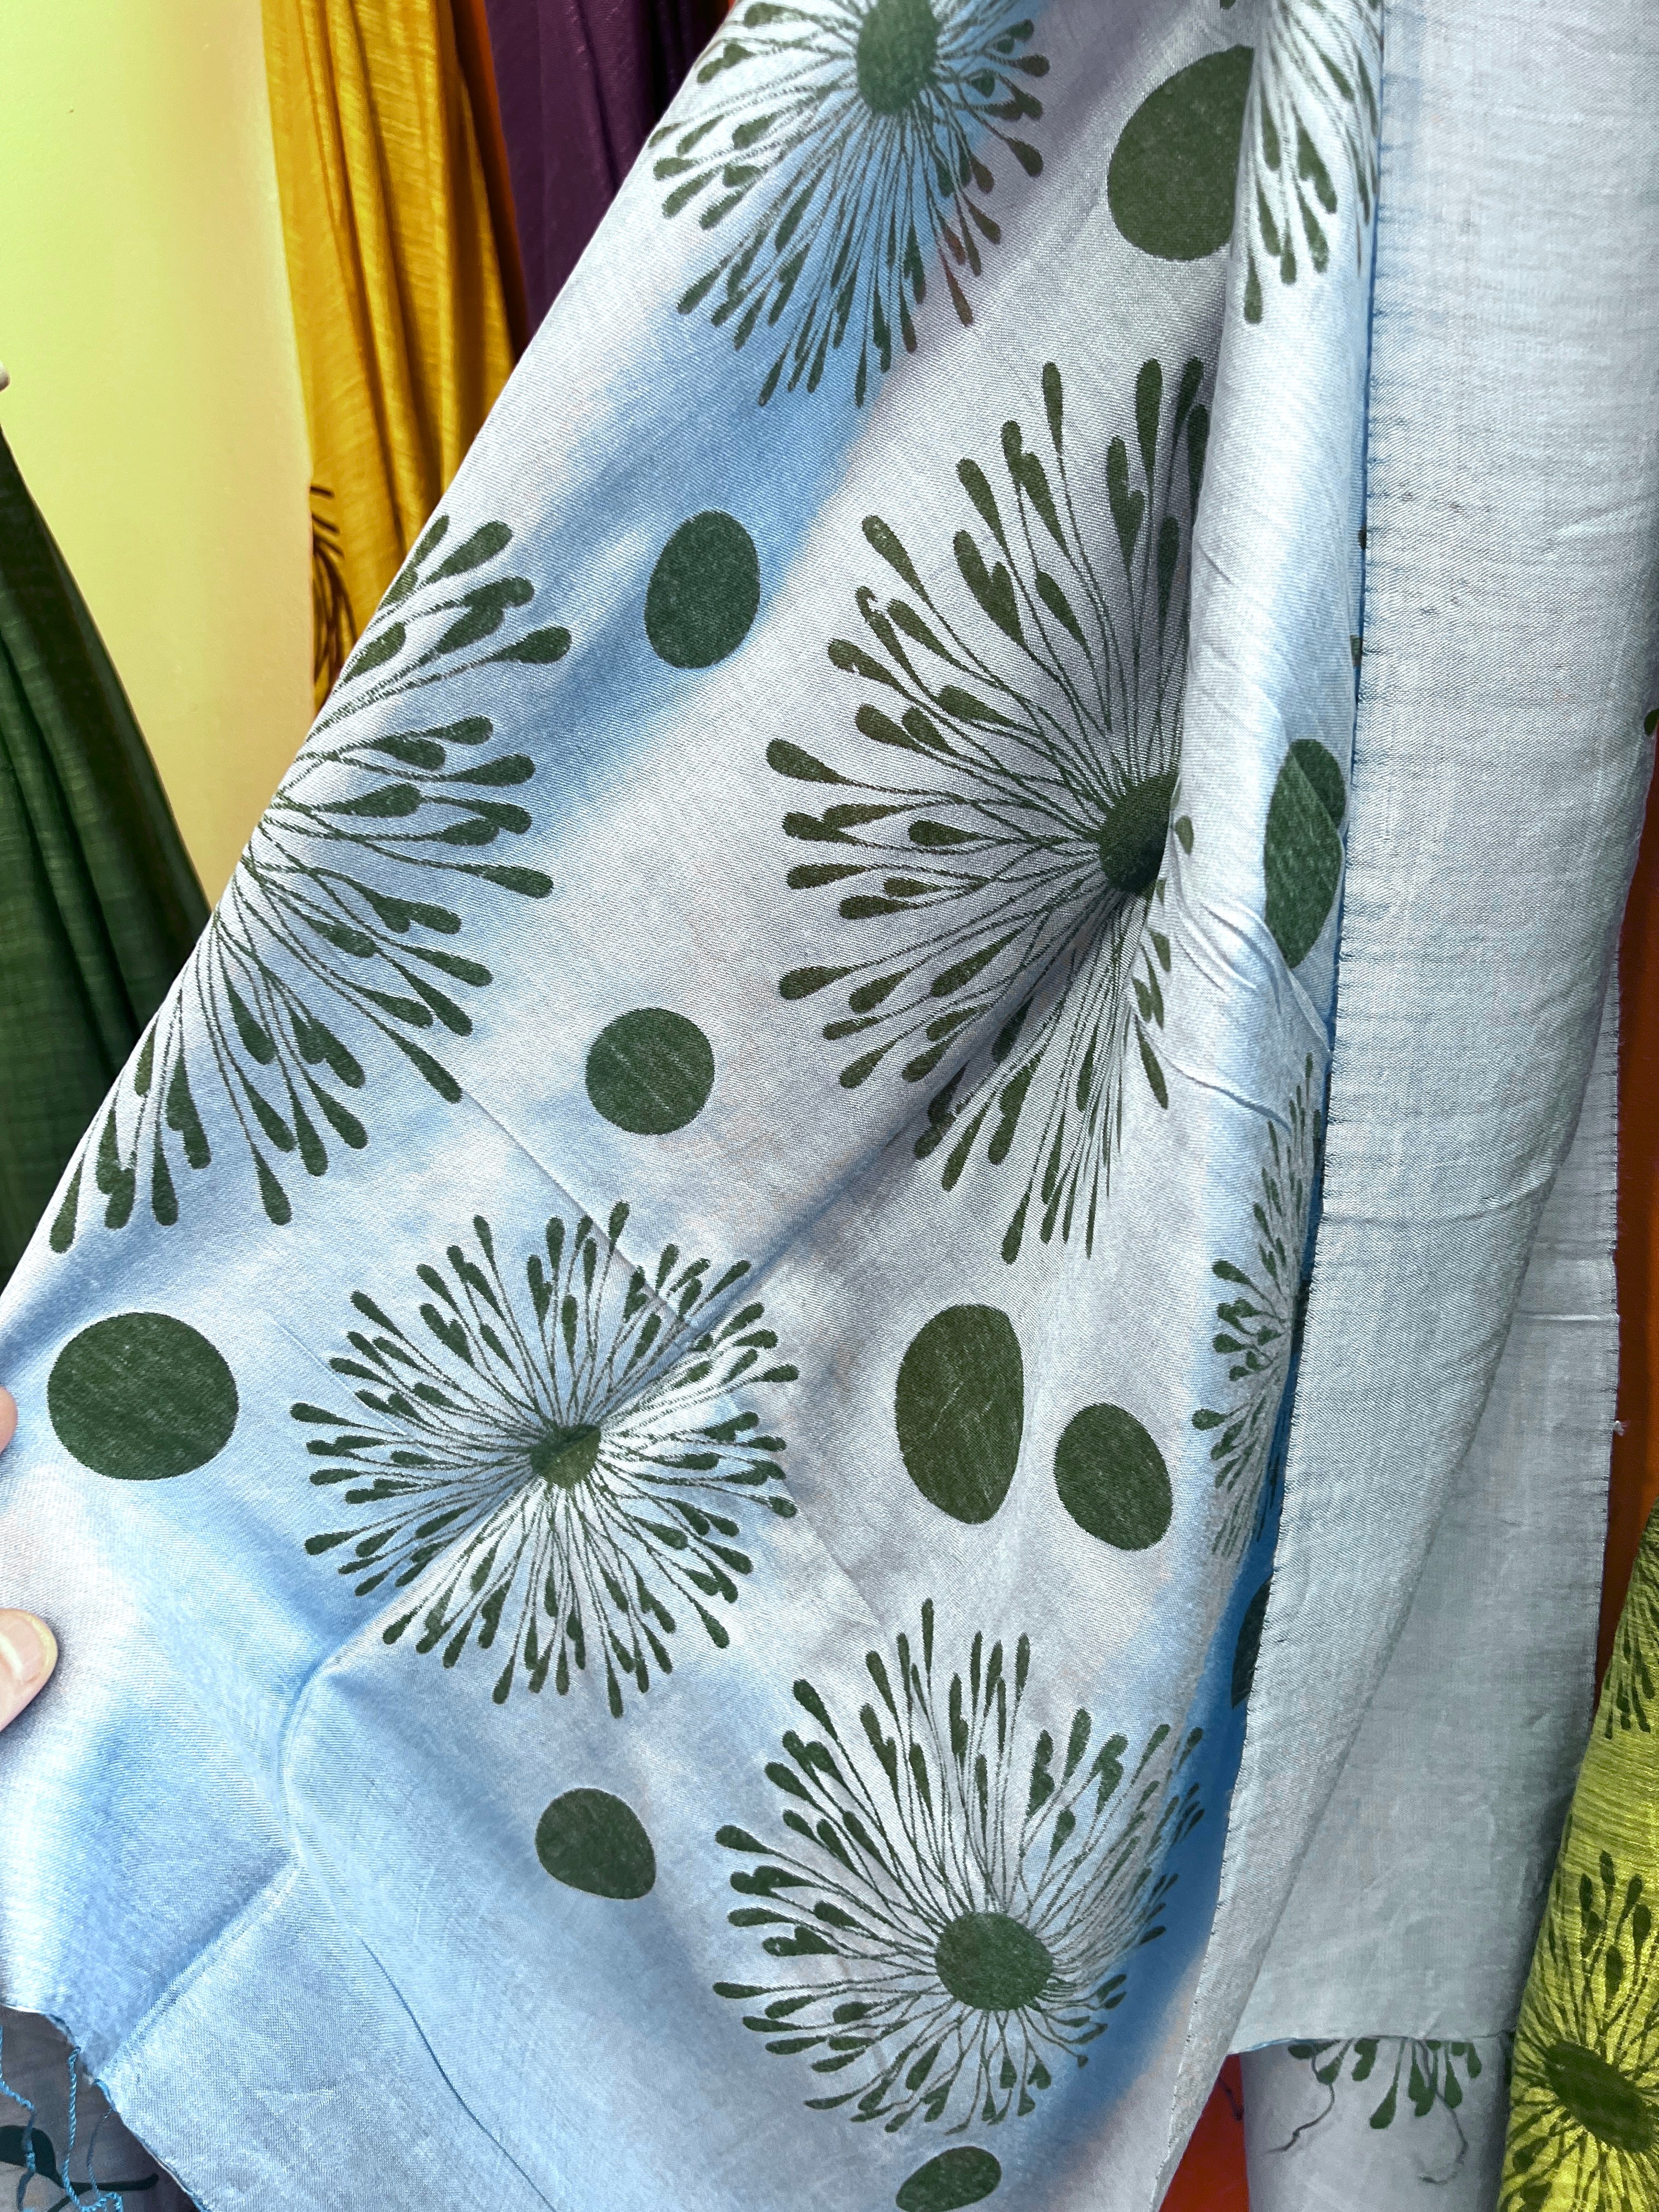 NEW! Silk Blend Scarves in 12! colors and patterns, screen printed by hand